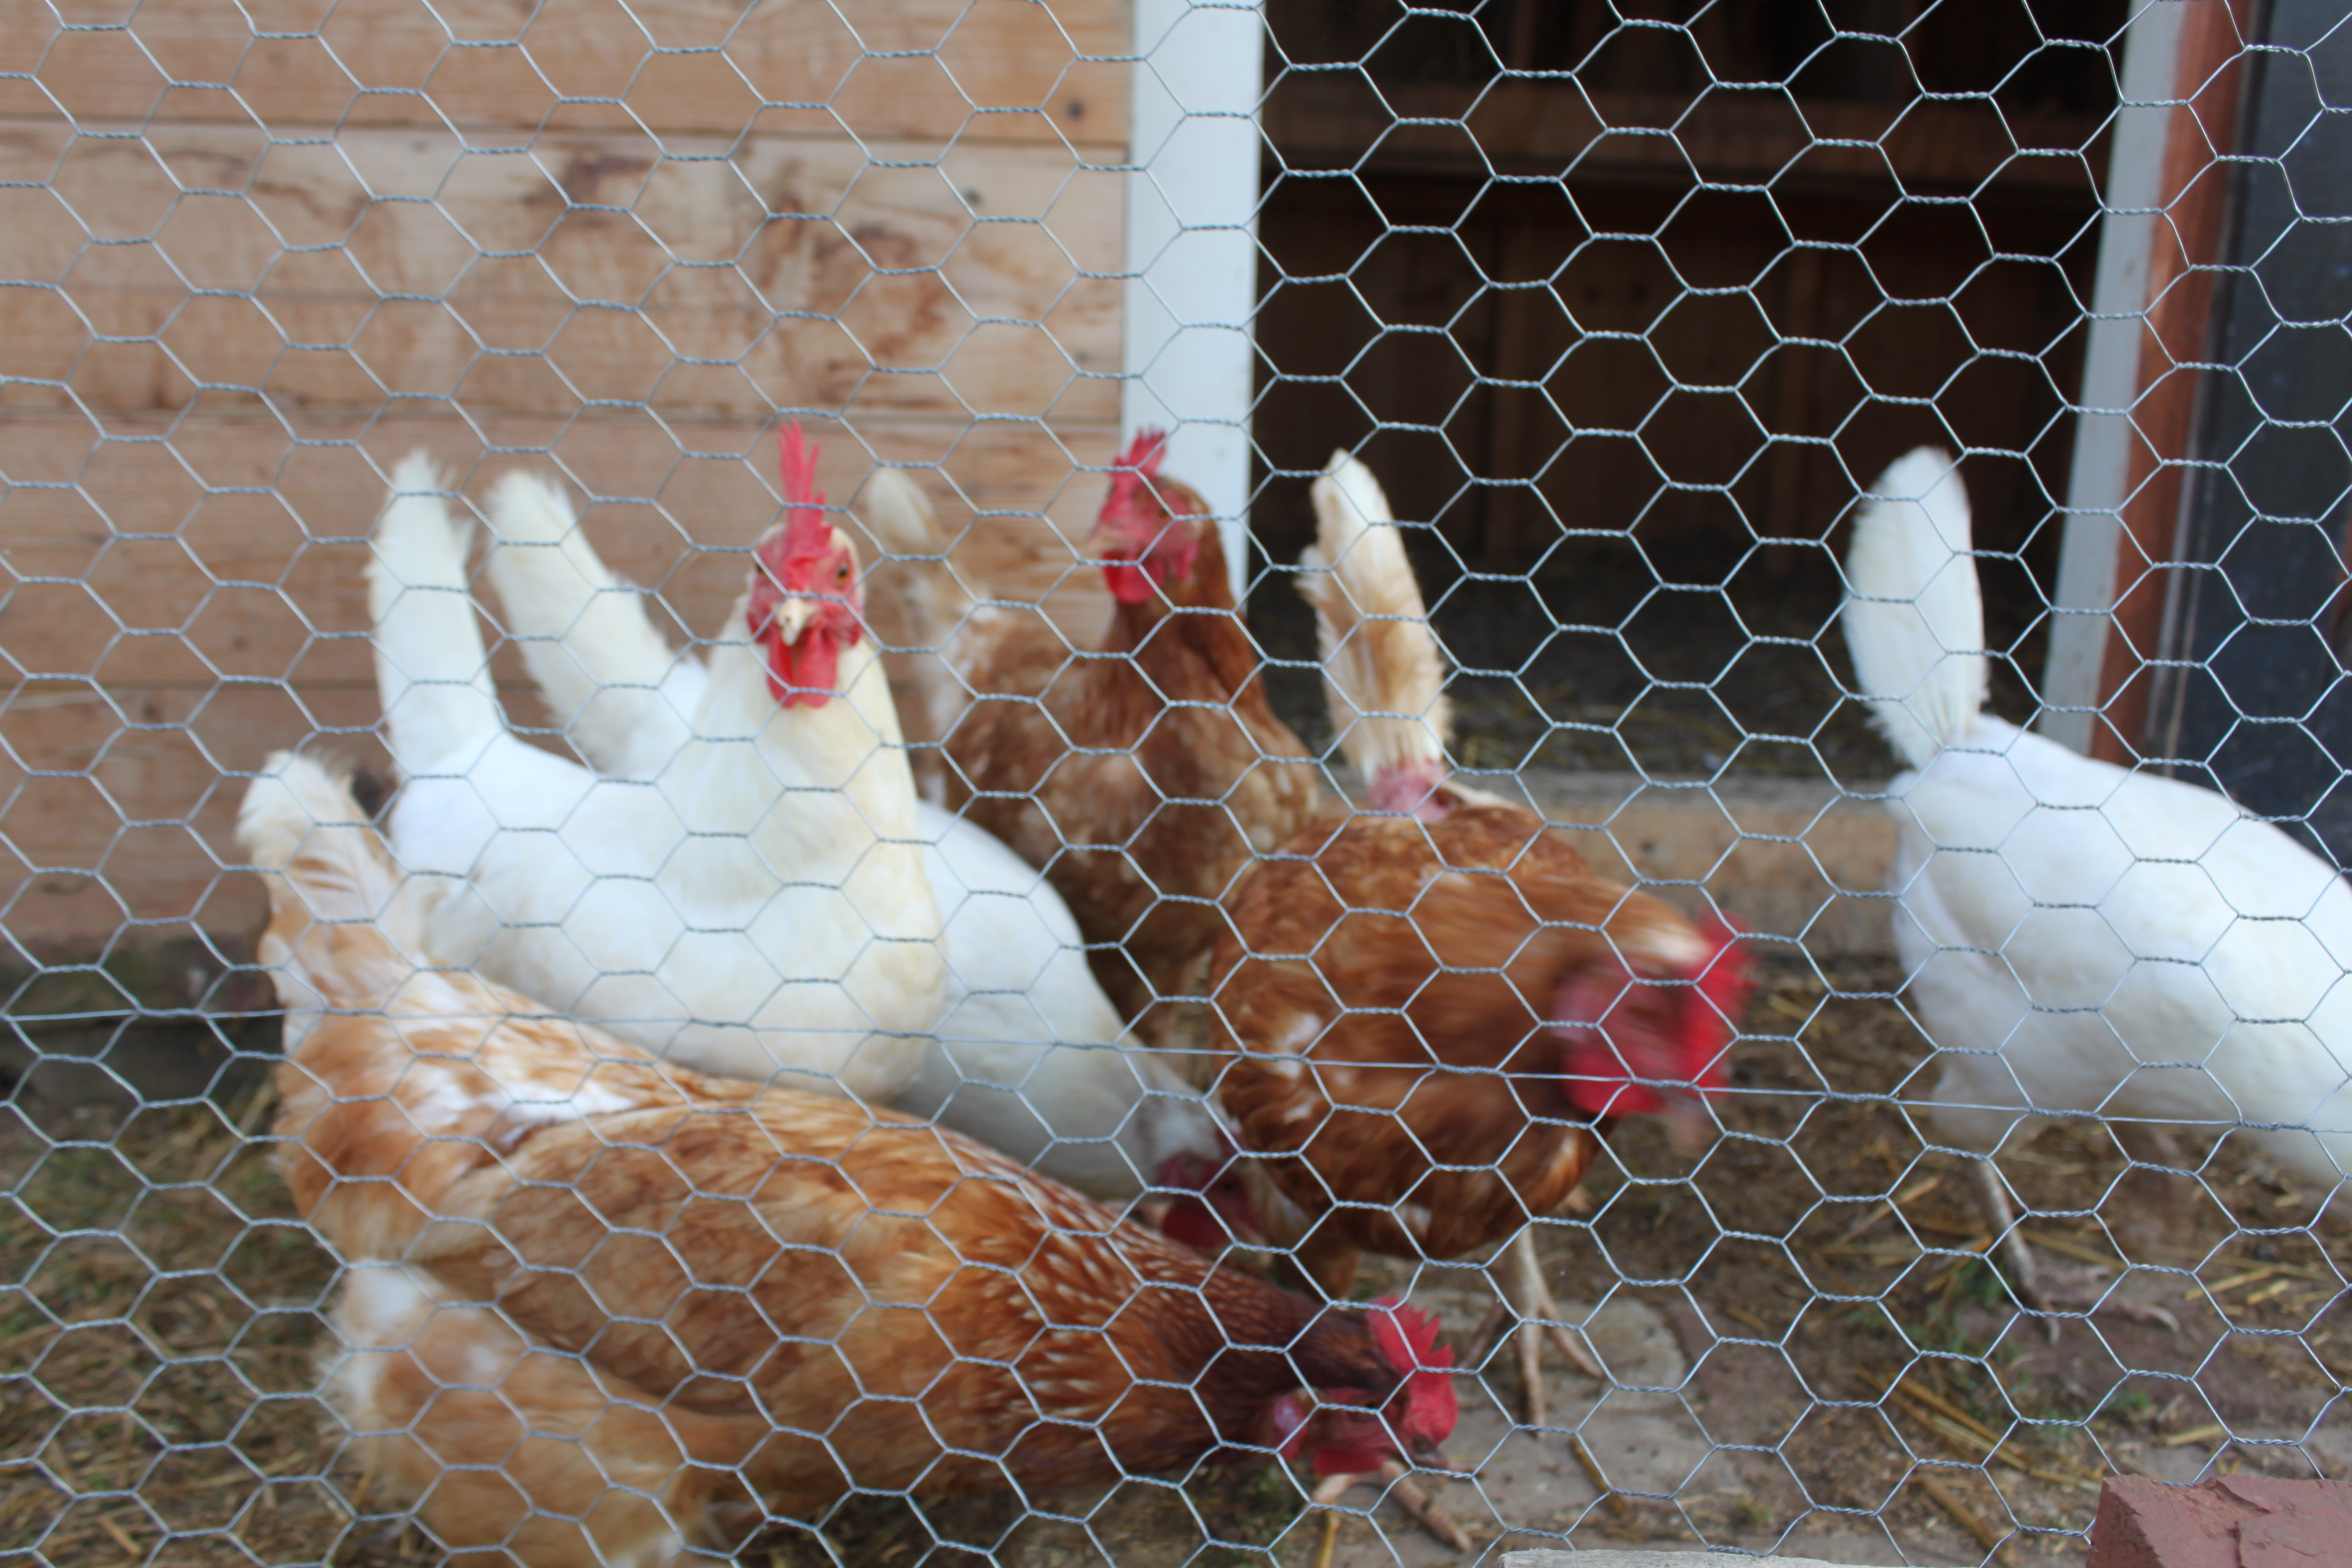 News From The Coop – The Hens are Happy! | Old World Garden Farms